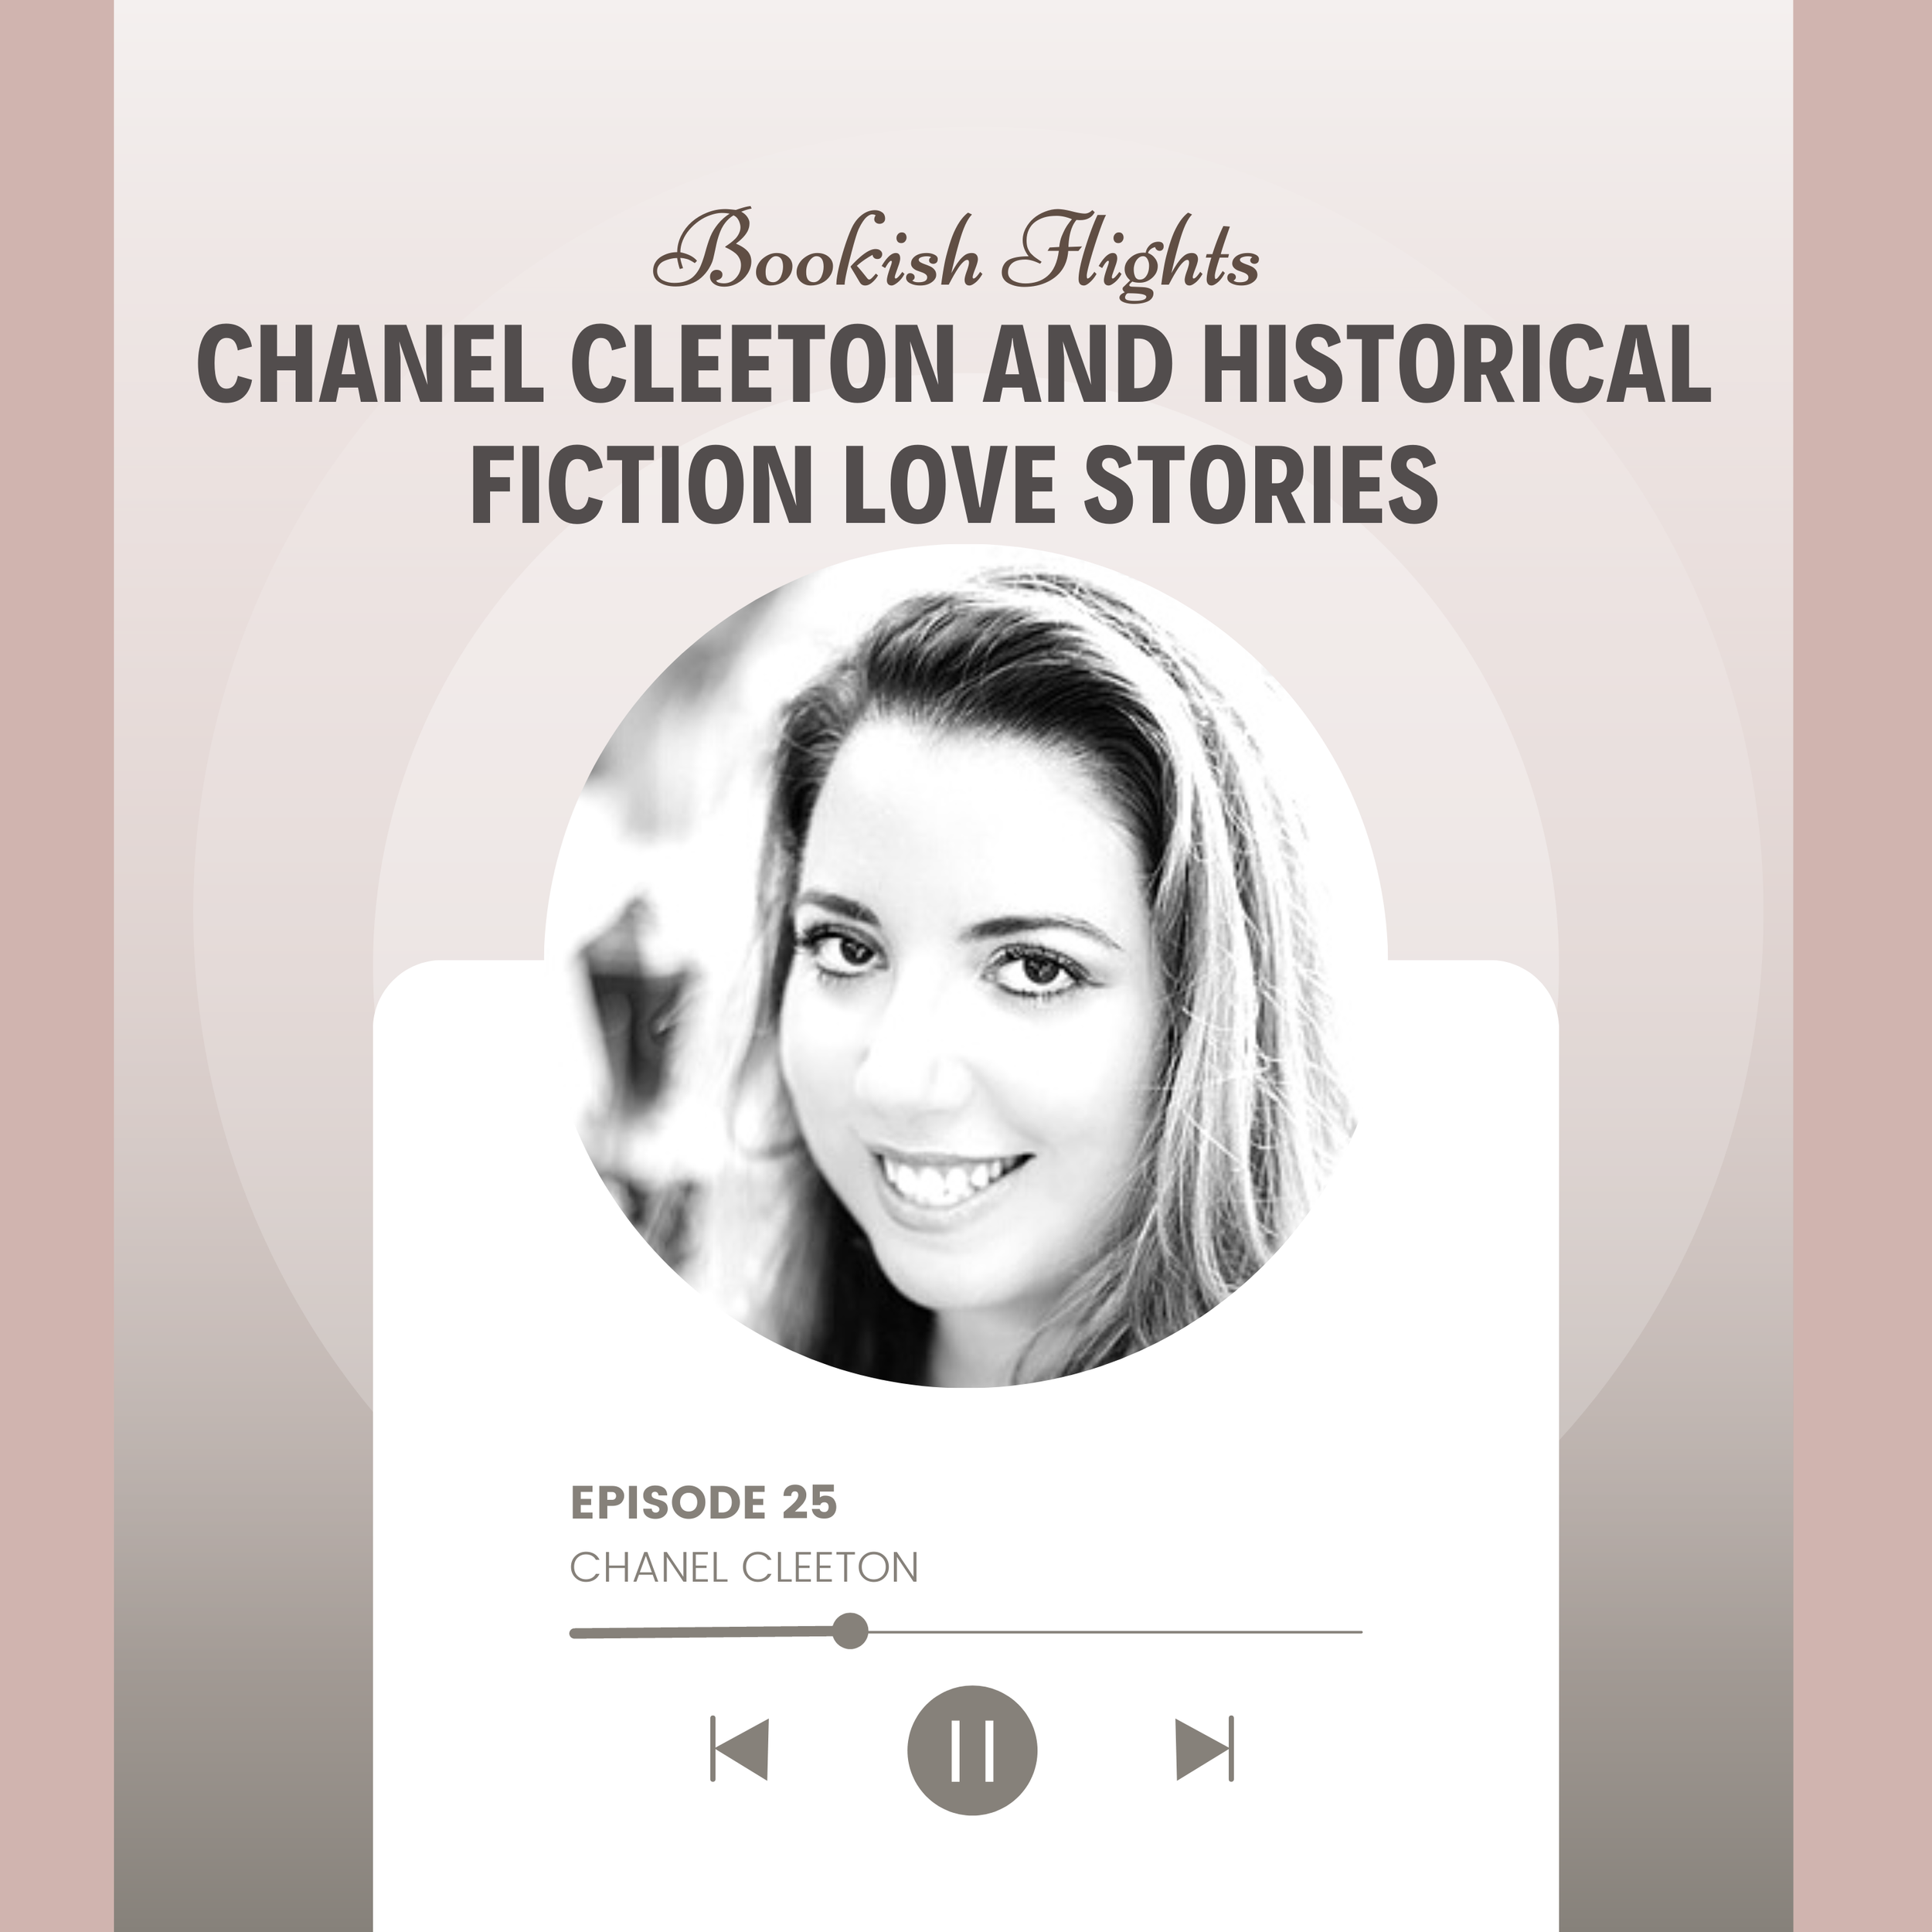 Chanel Cleeton and Historical Fiction Love Stories (E25) — Bookish